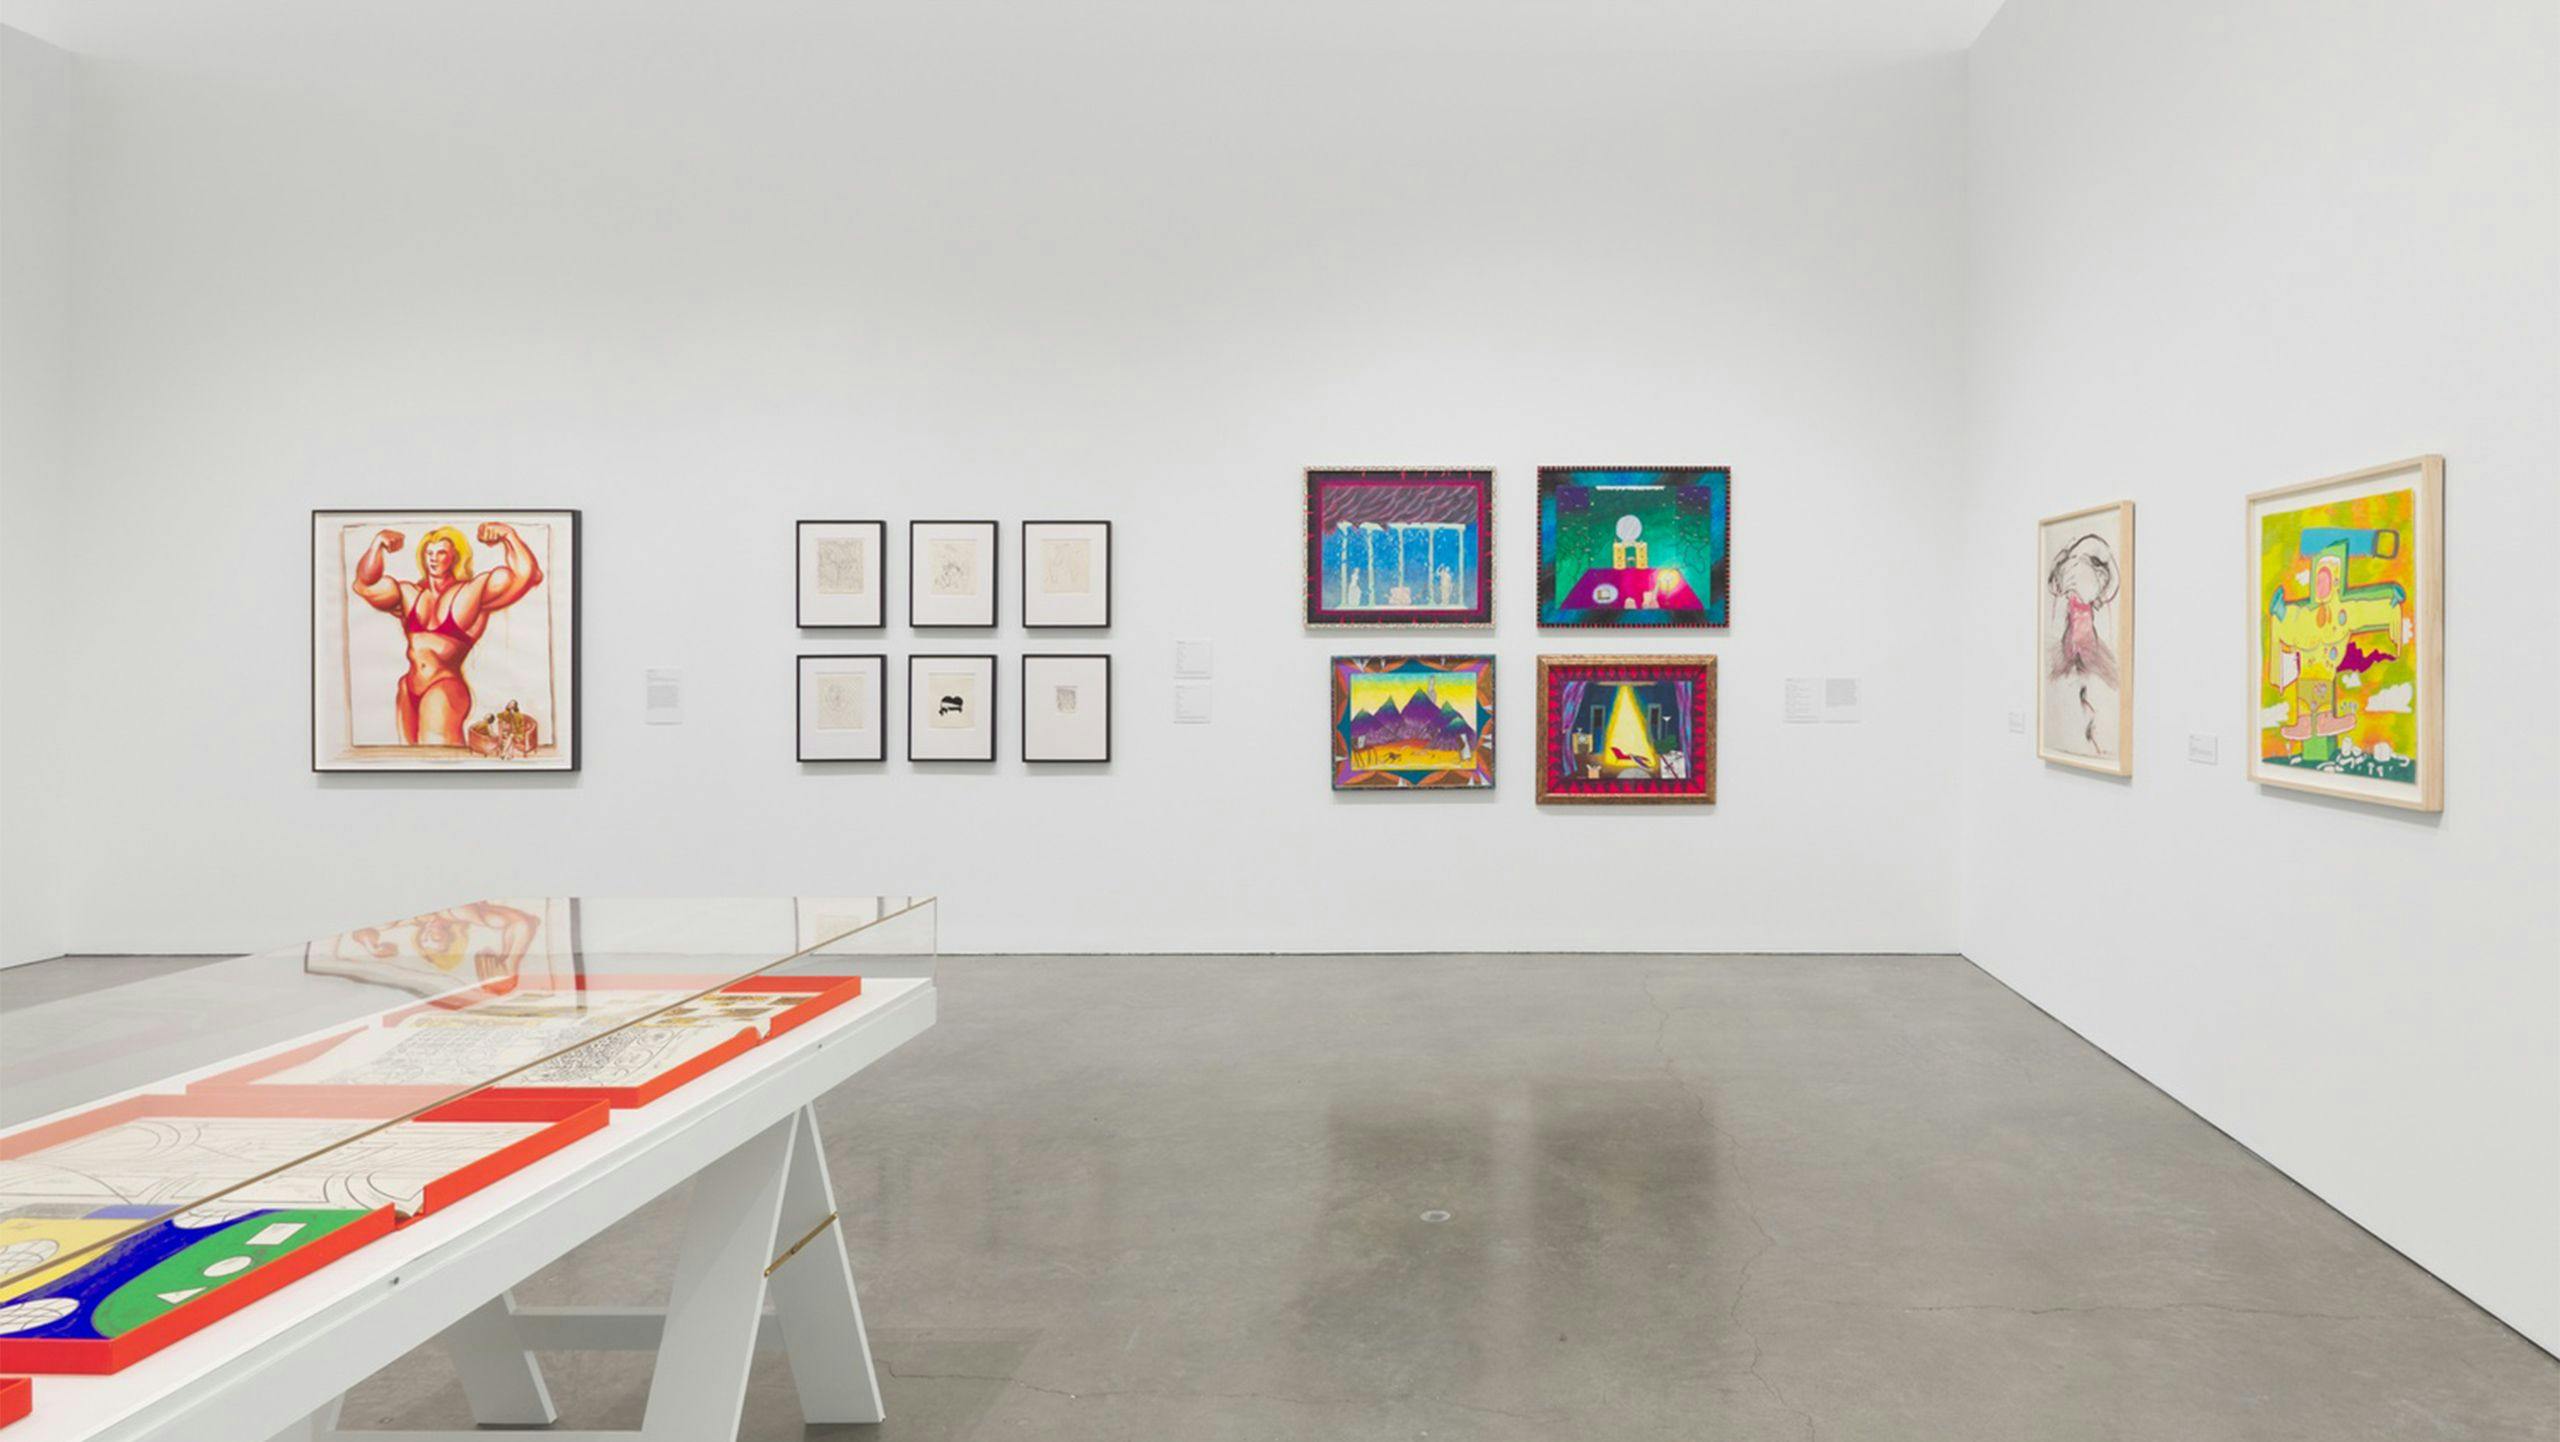 Installation view of an exhibition titled Closer to Life: Drawings and Works on Paper in the Marieluise Hessel Collection, at CCS Bard Galleries in New York, dated 2021.